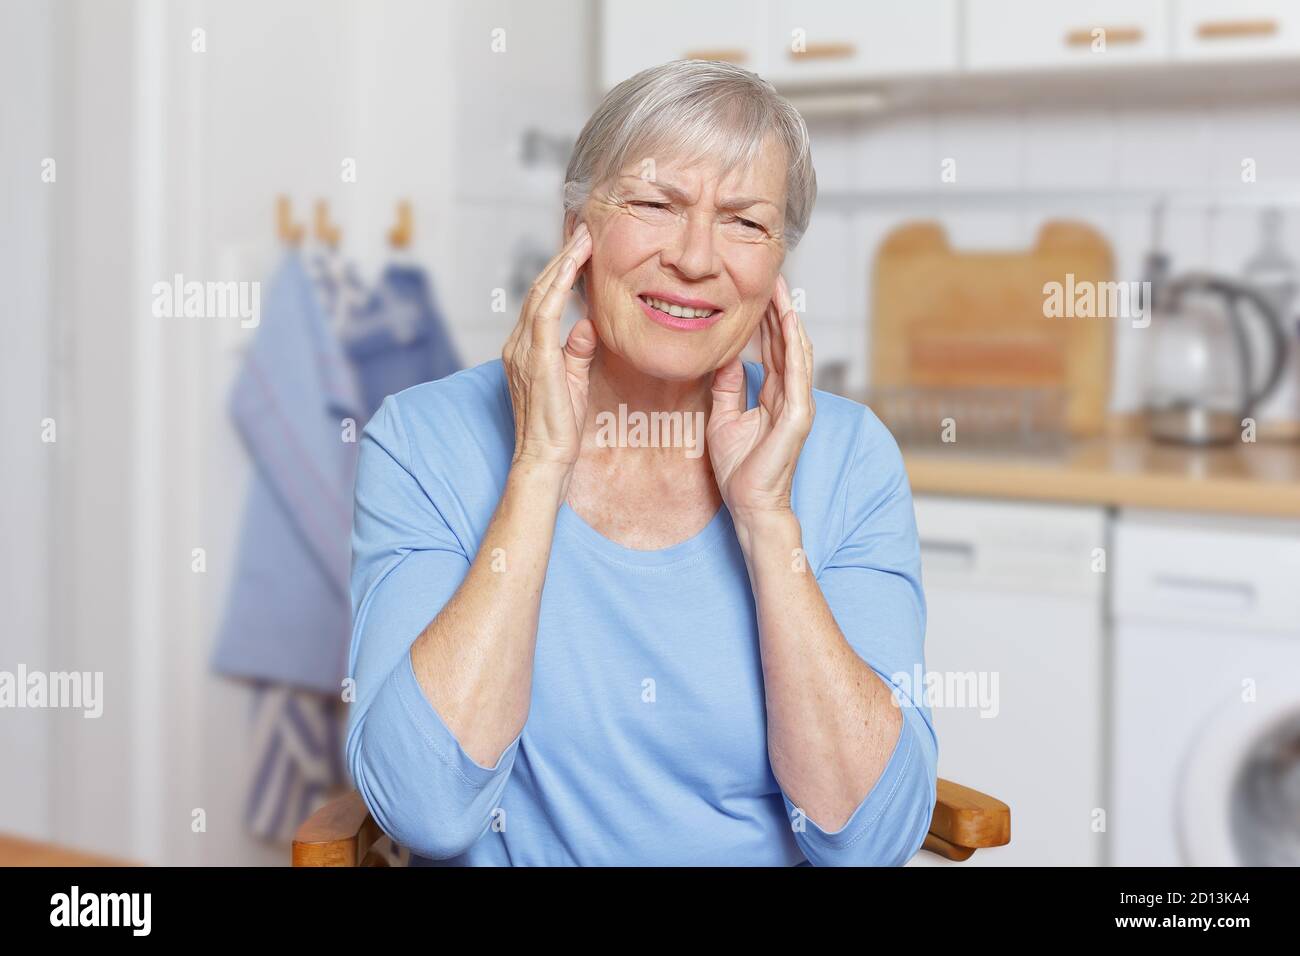 Temporal arteritis: elderly woman suffering from painful jaw joints. Stock Photo